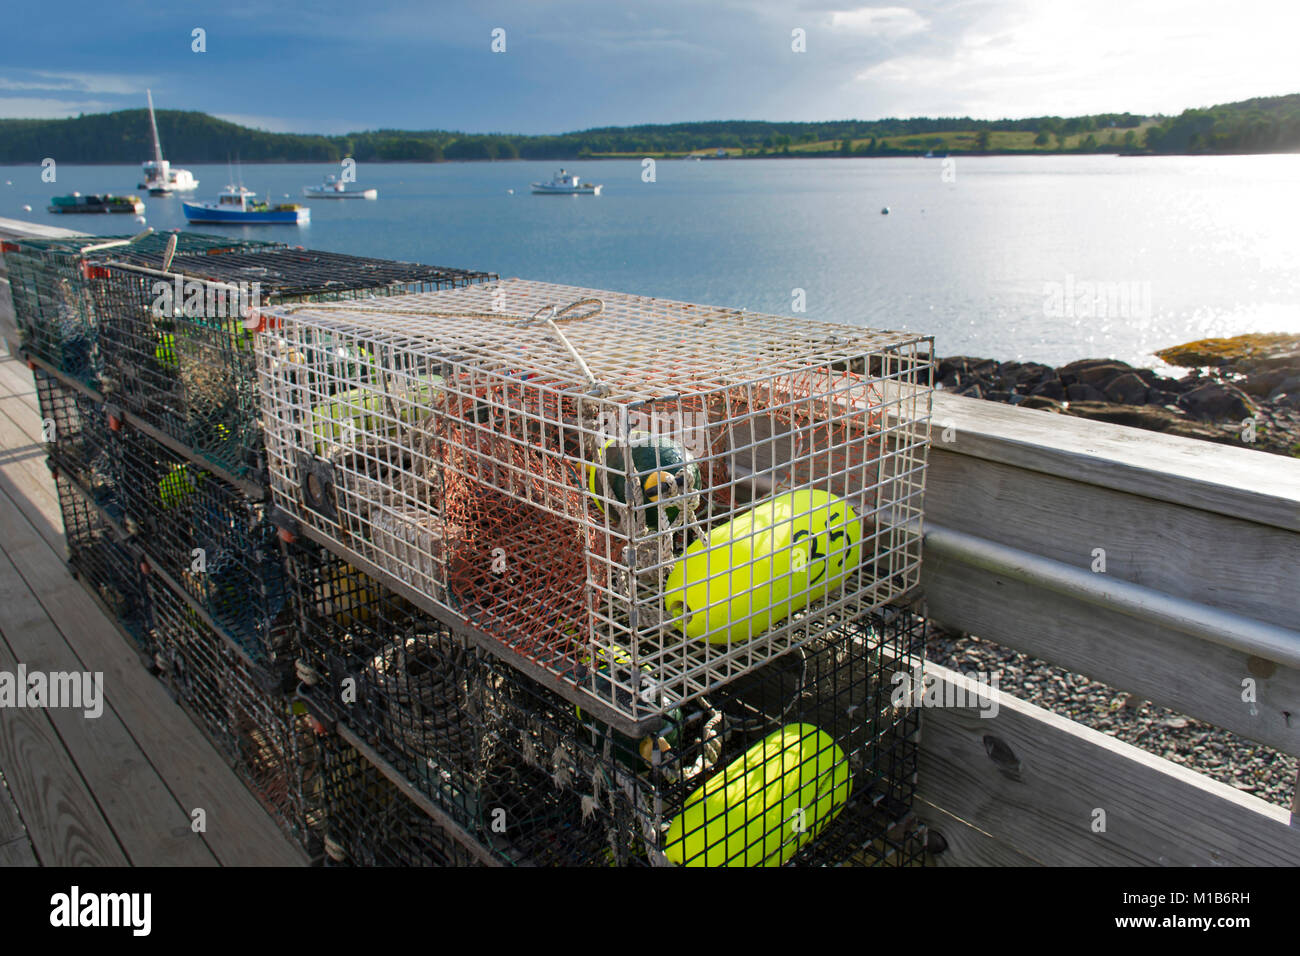 Lobster Traps on a dock with a harbor in the background - taken in Bartlett Narrows, Maine, USA Stock Photo